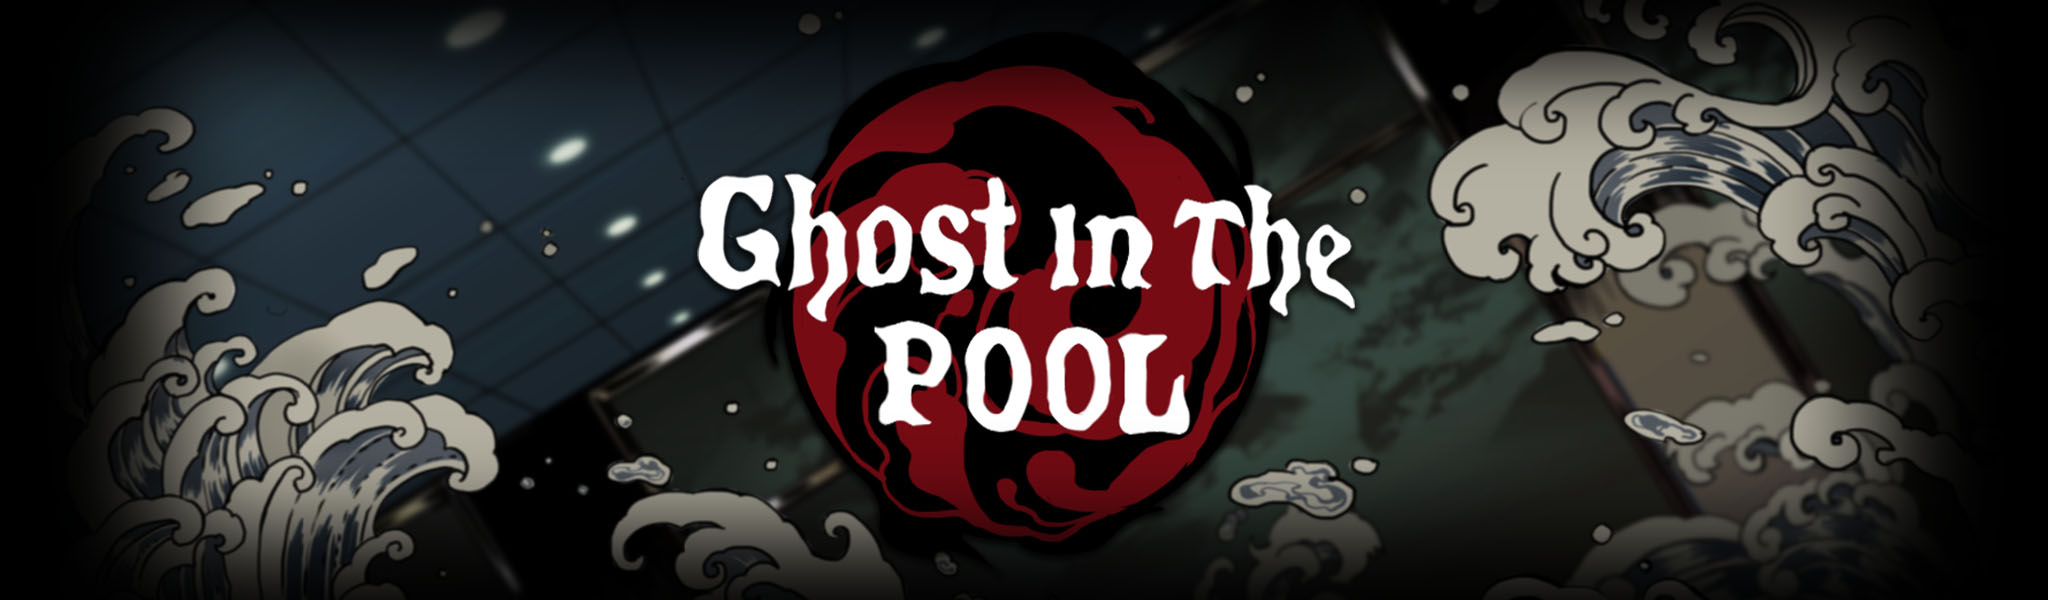 Ghost in the pool